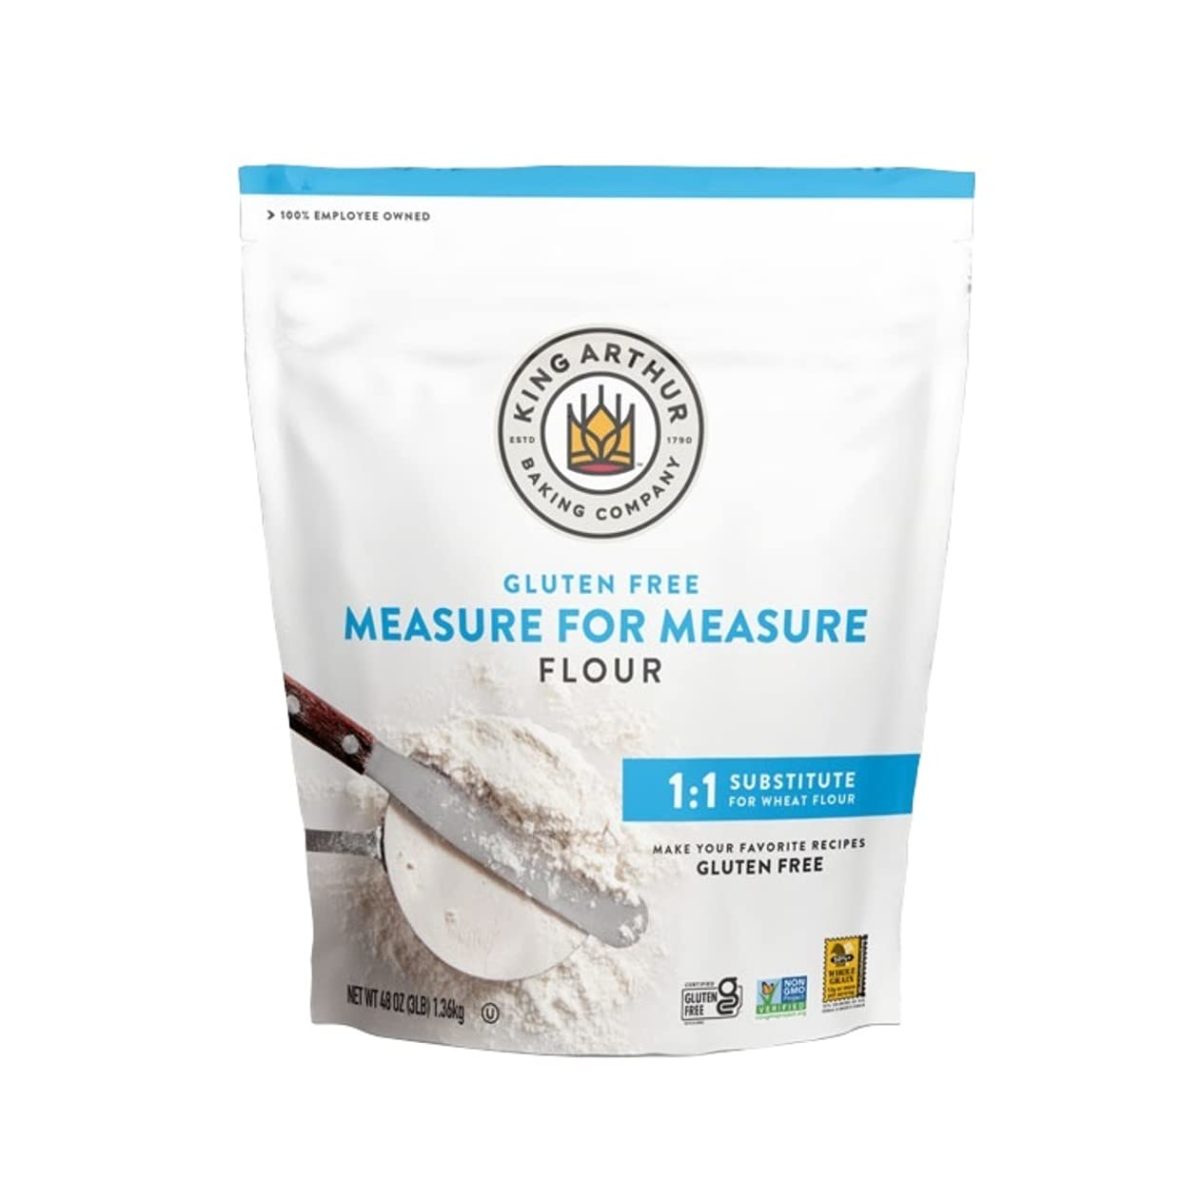 Use measure for measure white gluten-free flour as a substitute for almond flour